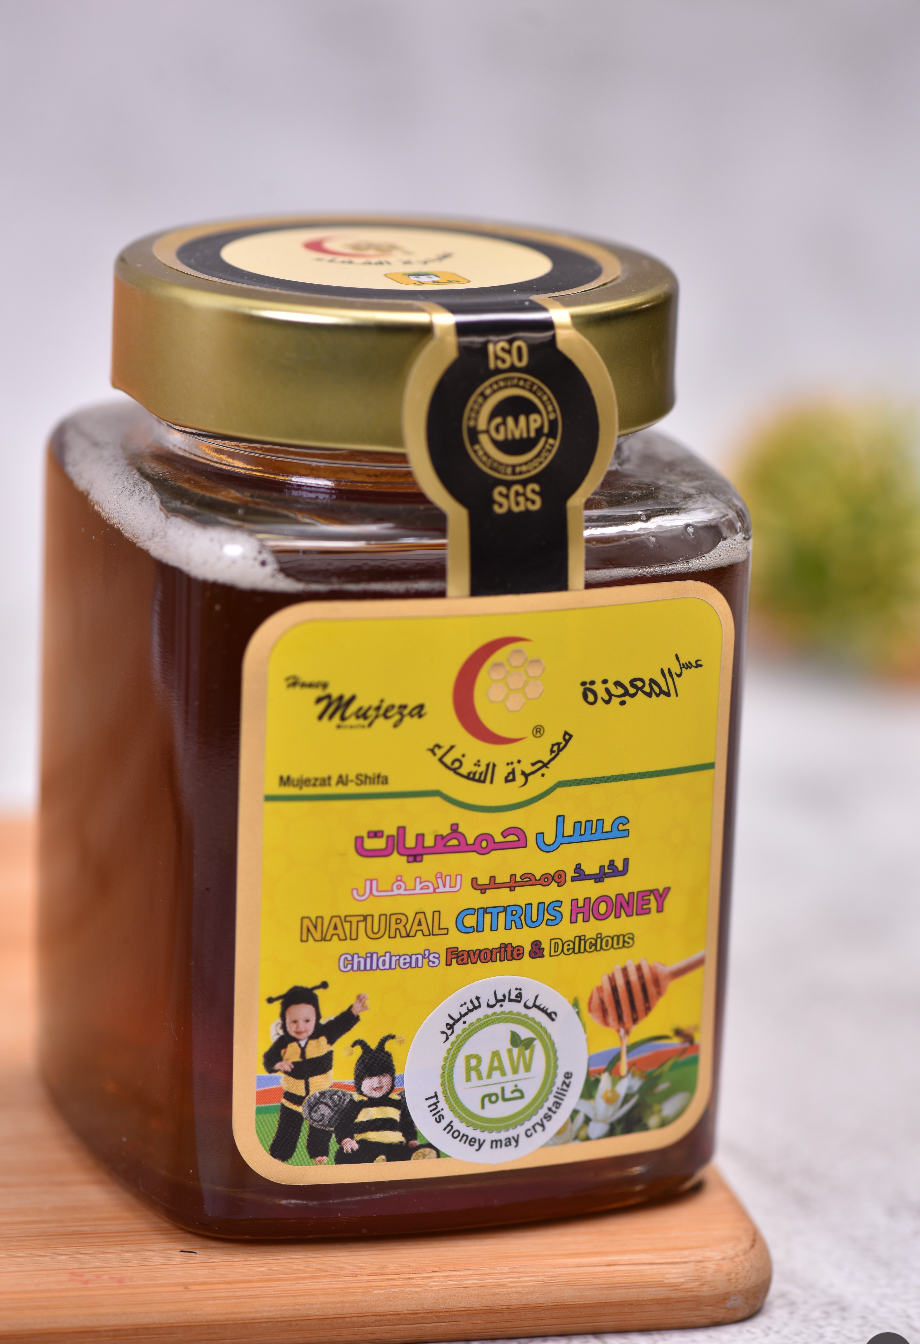 CITRUS HONEY PURE AND NATURAL 100% FOR CHILDREN